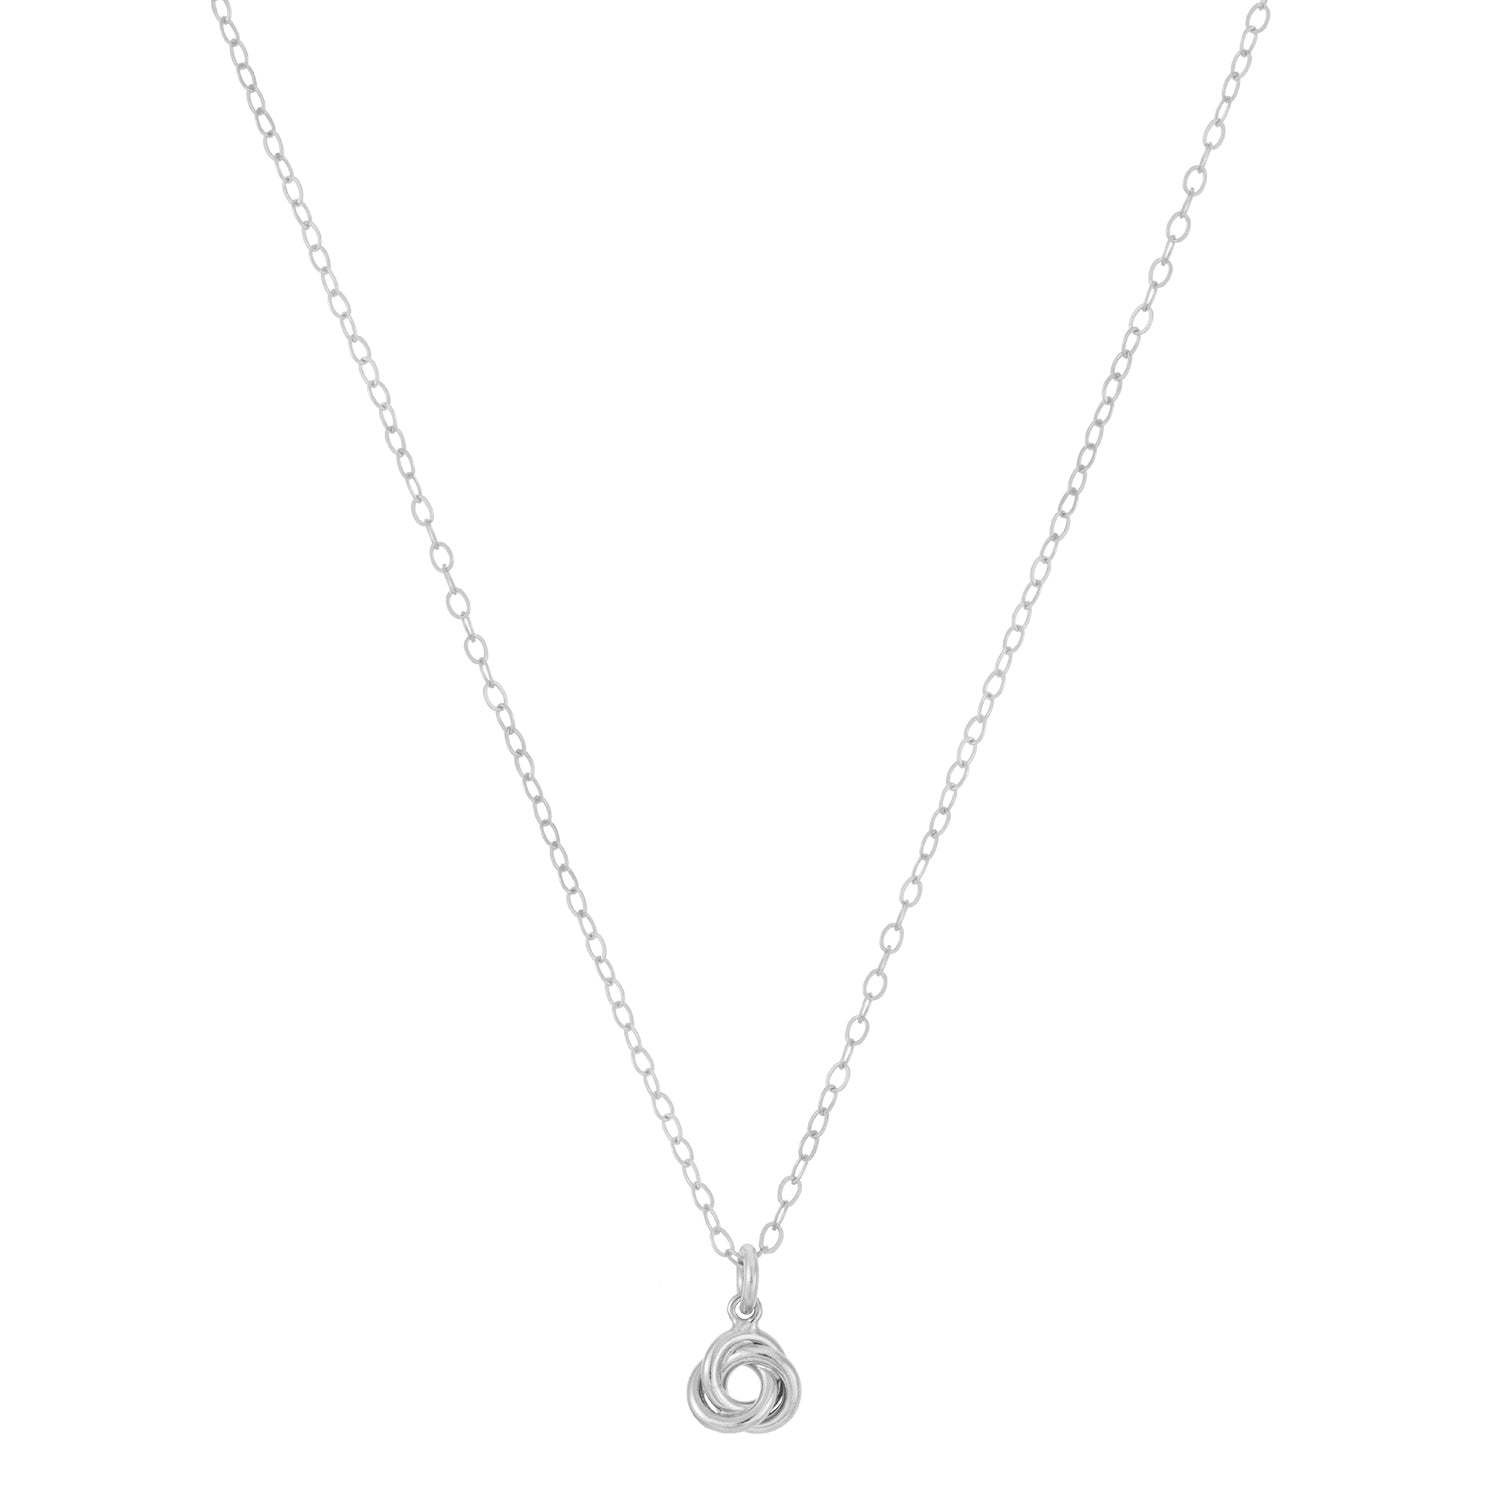 Rakva Love Knot Necklace With Earning